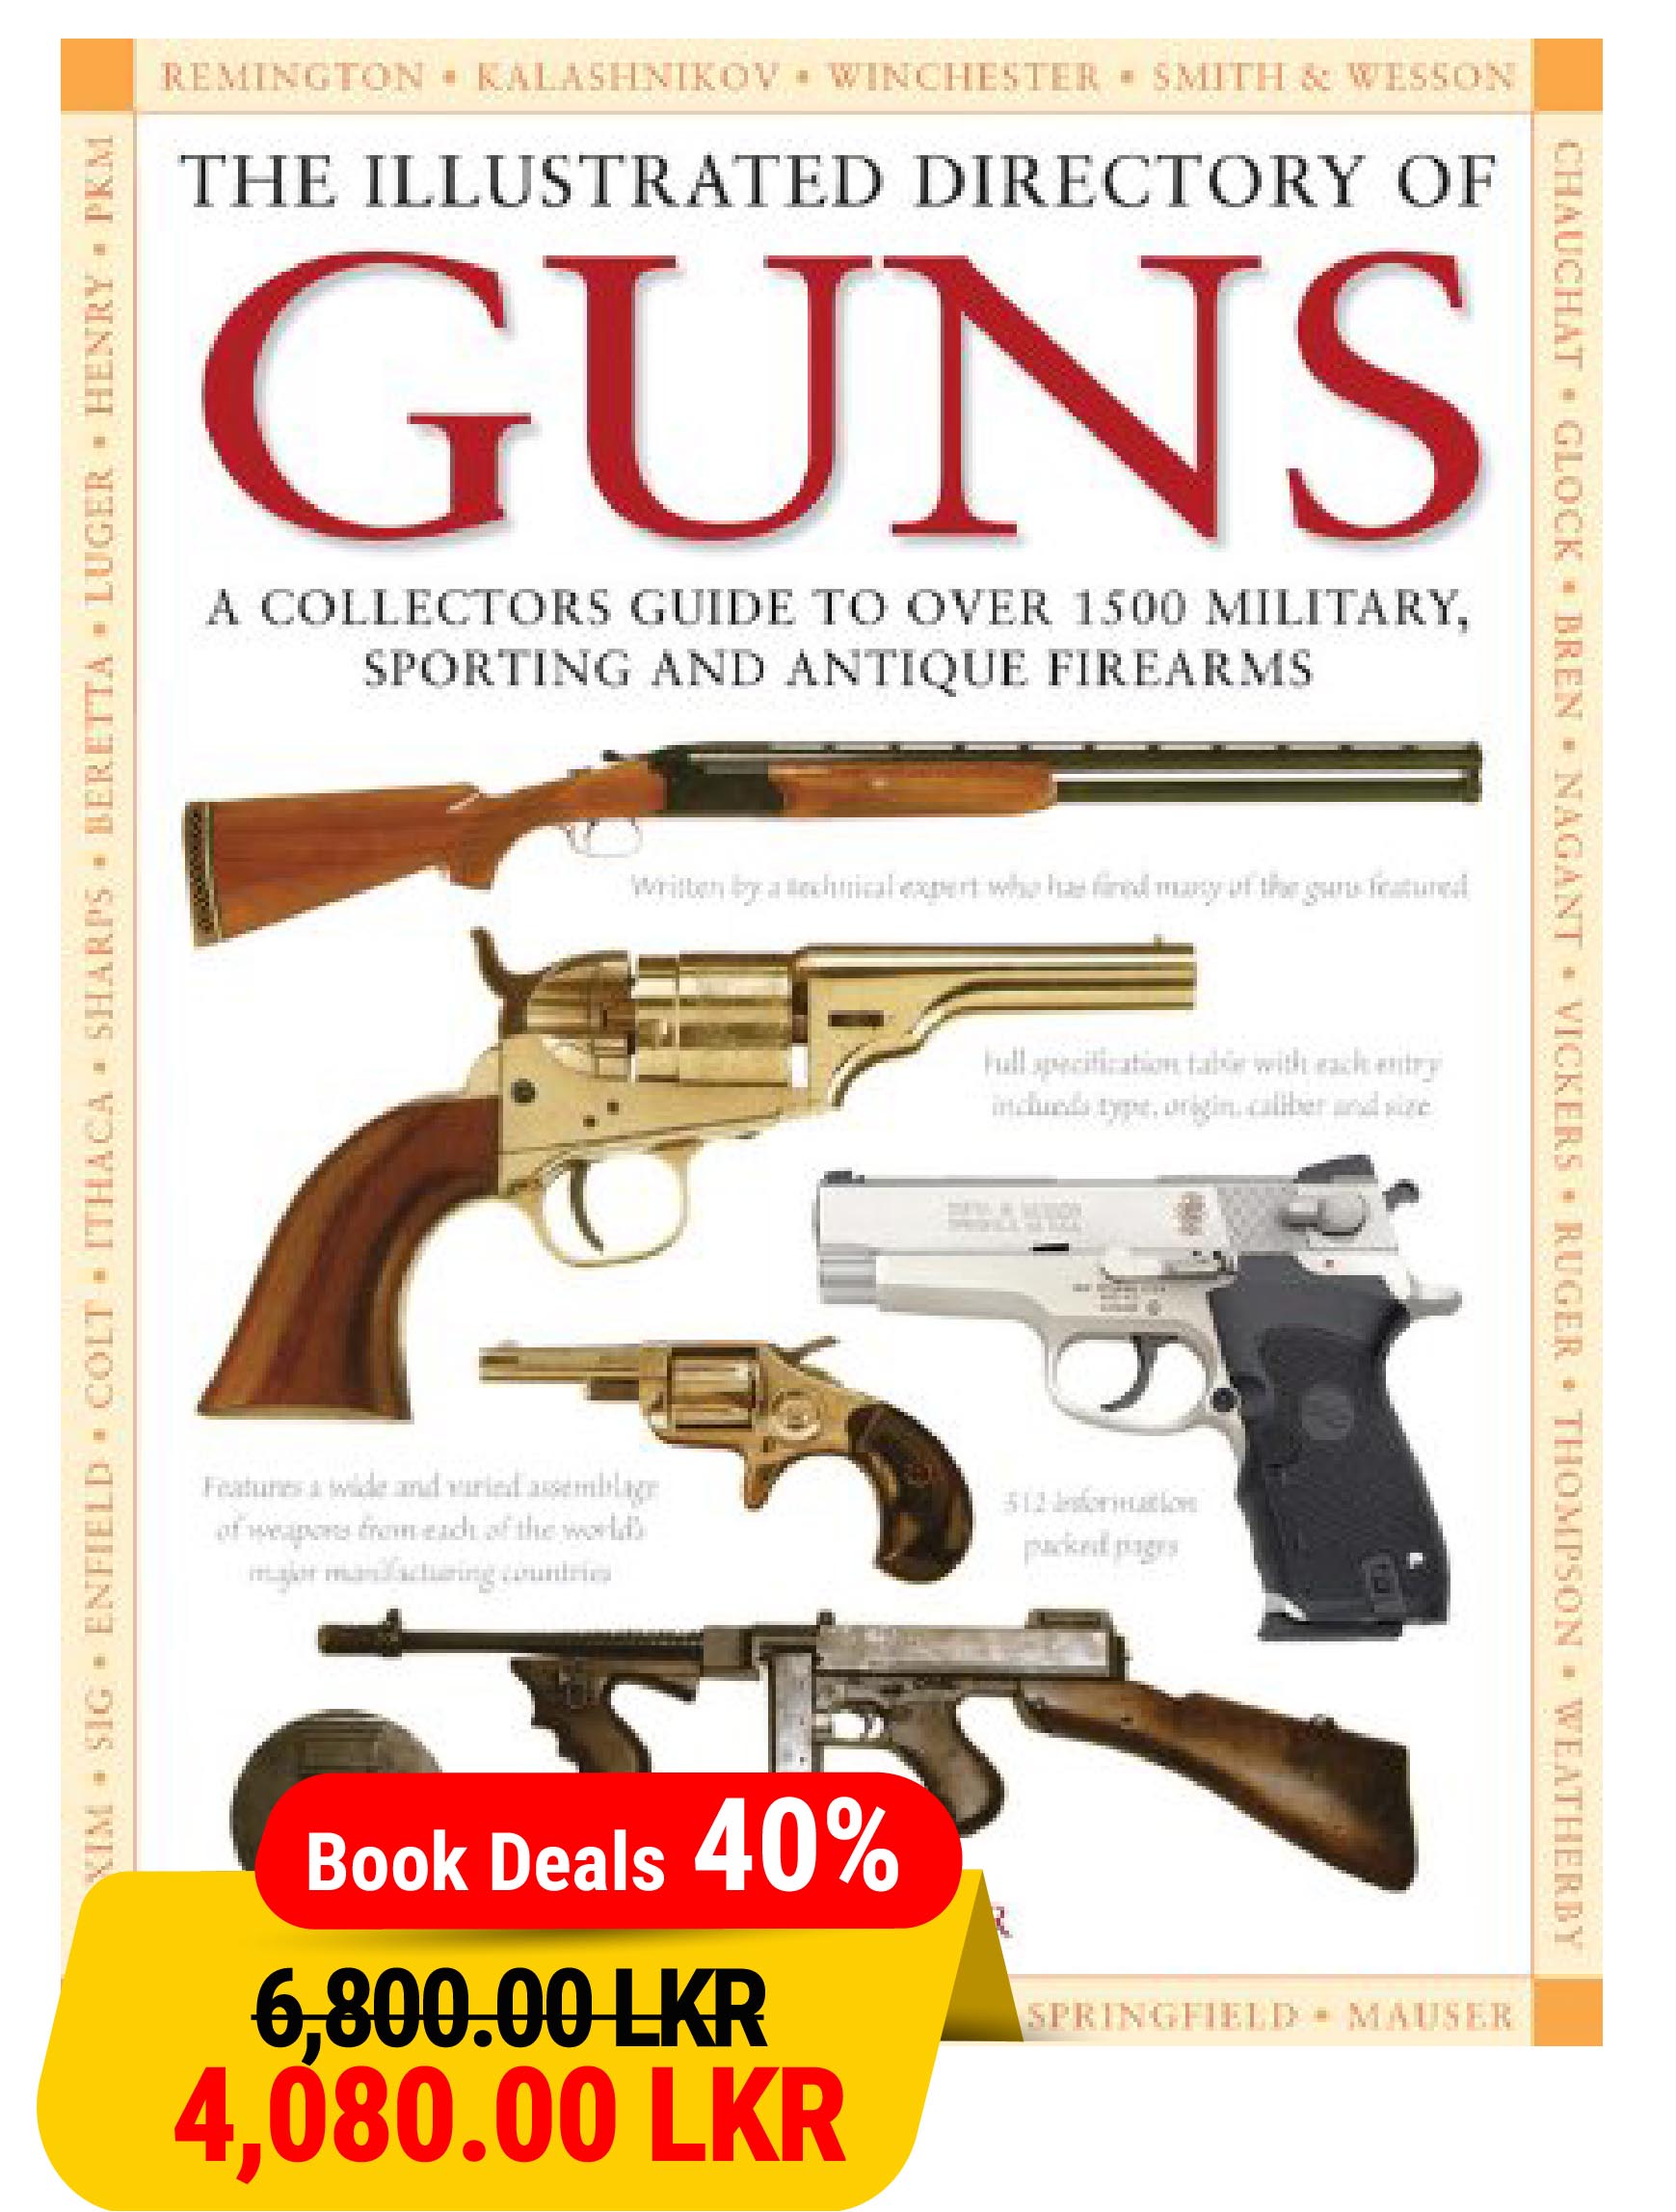 The Illustrated Directory of Guns: A Collectors Guide to Over 1500 Military, Sporting and Antique Firearms